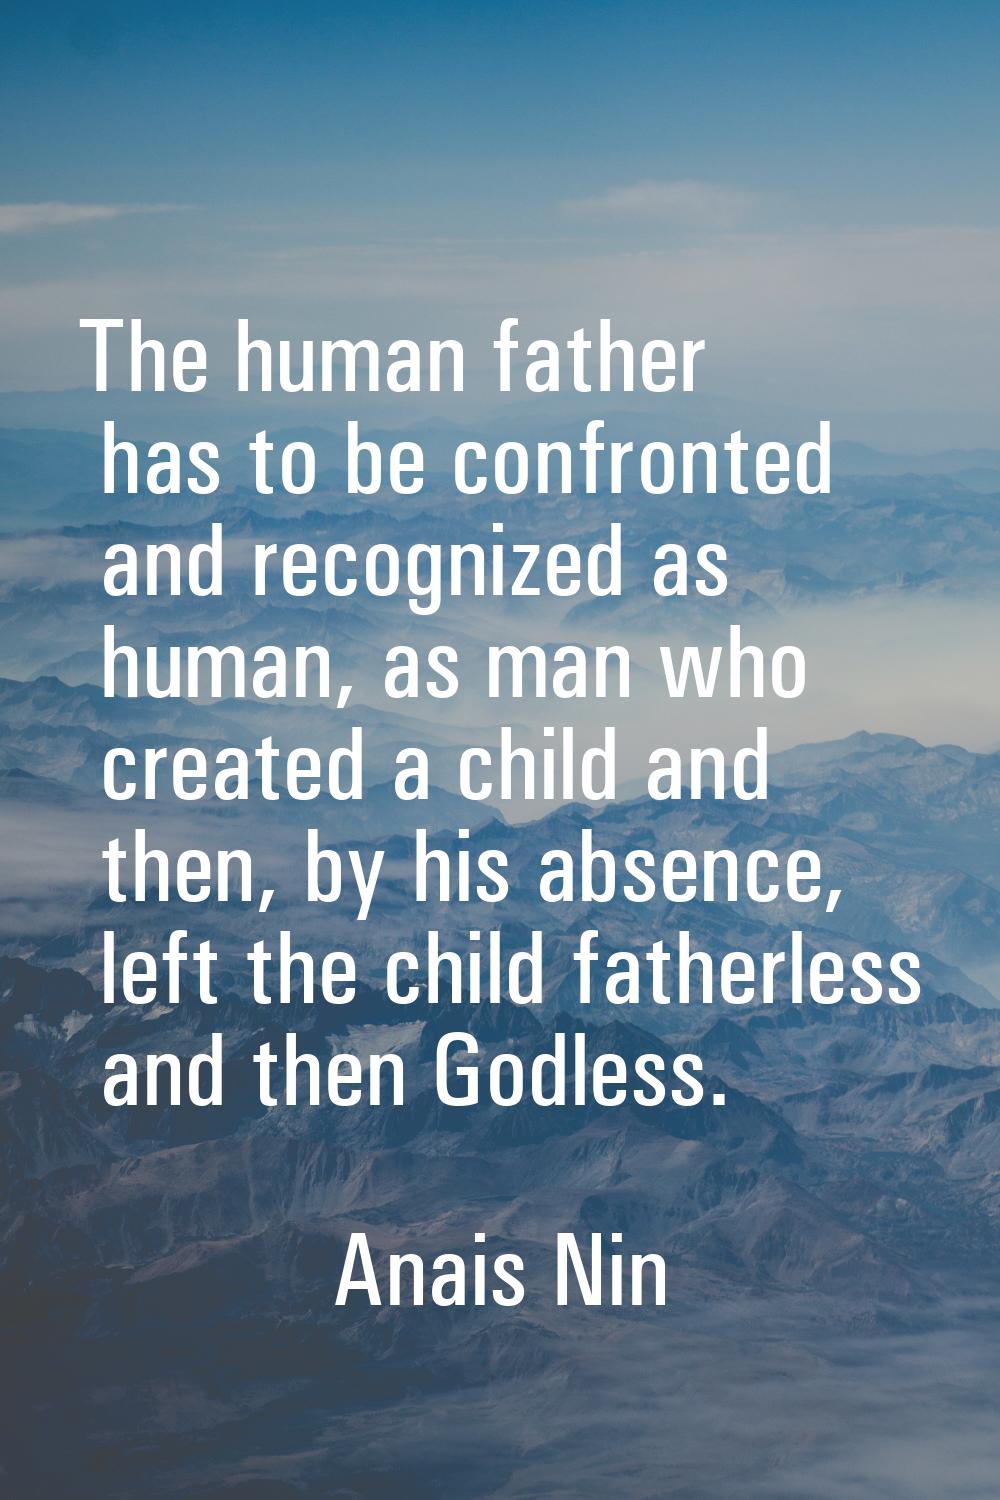 The human father has to be confronted and recognized as human, as man who created a child and then,